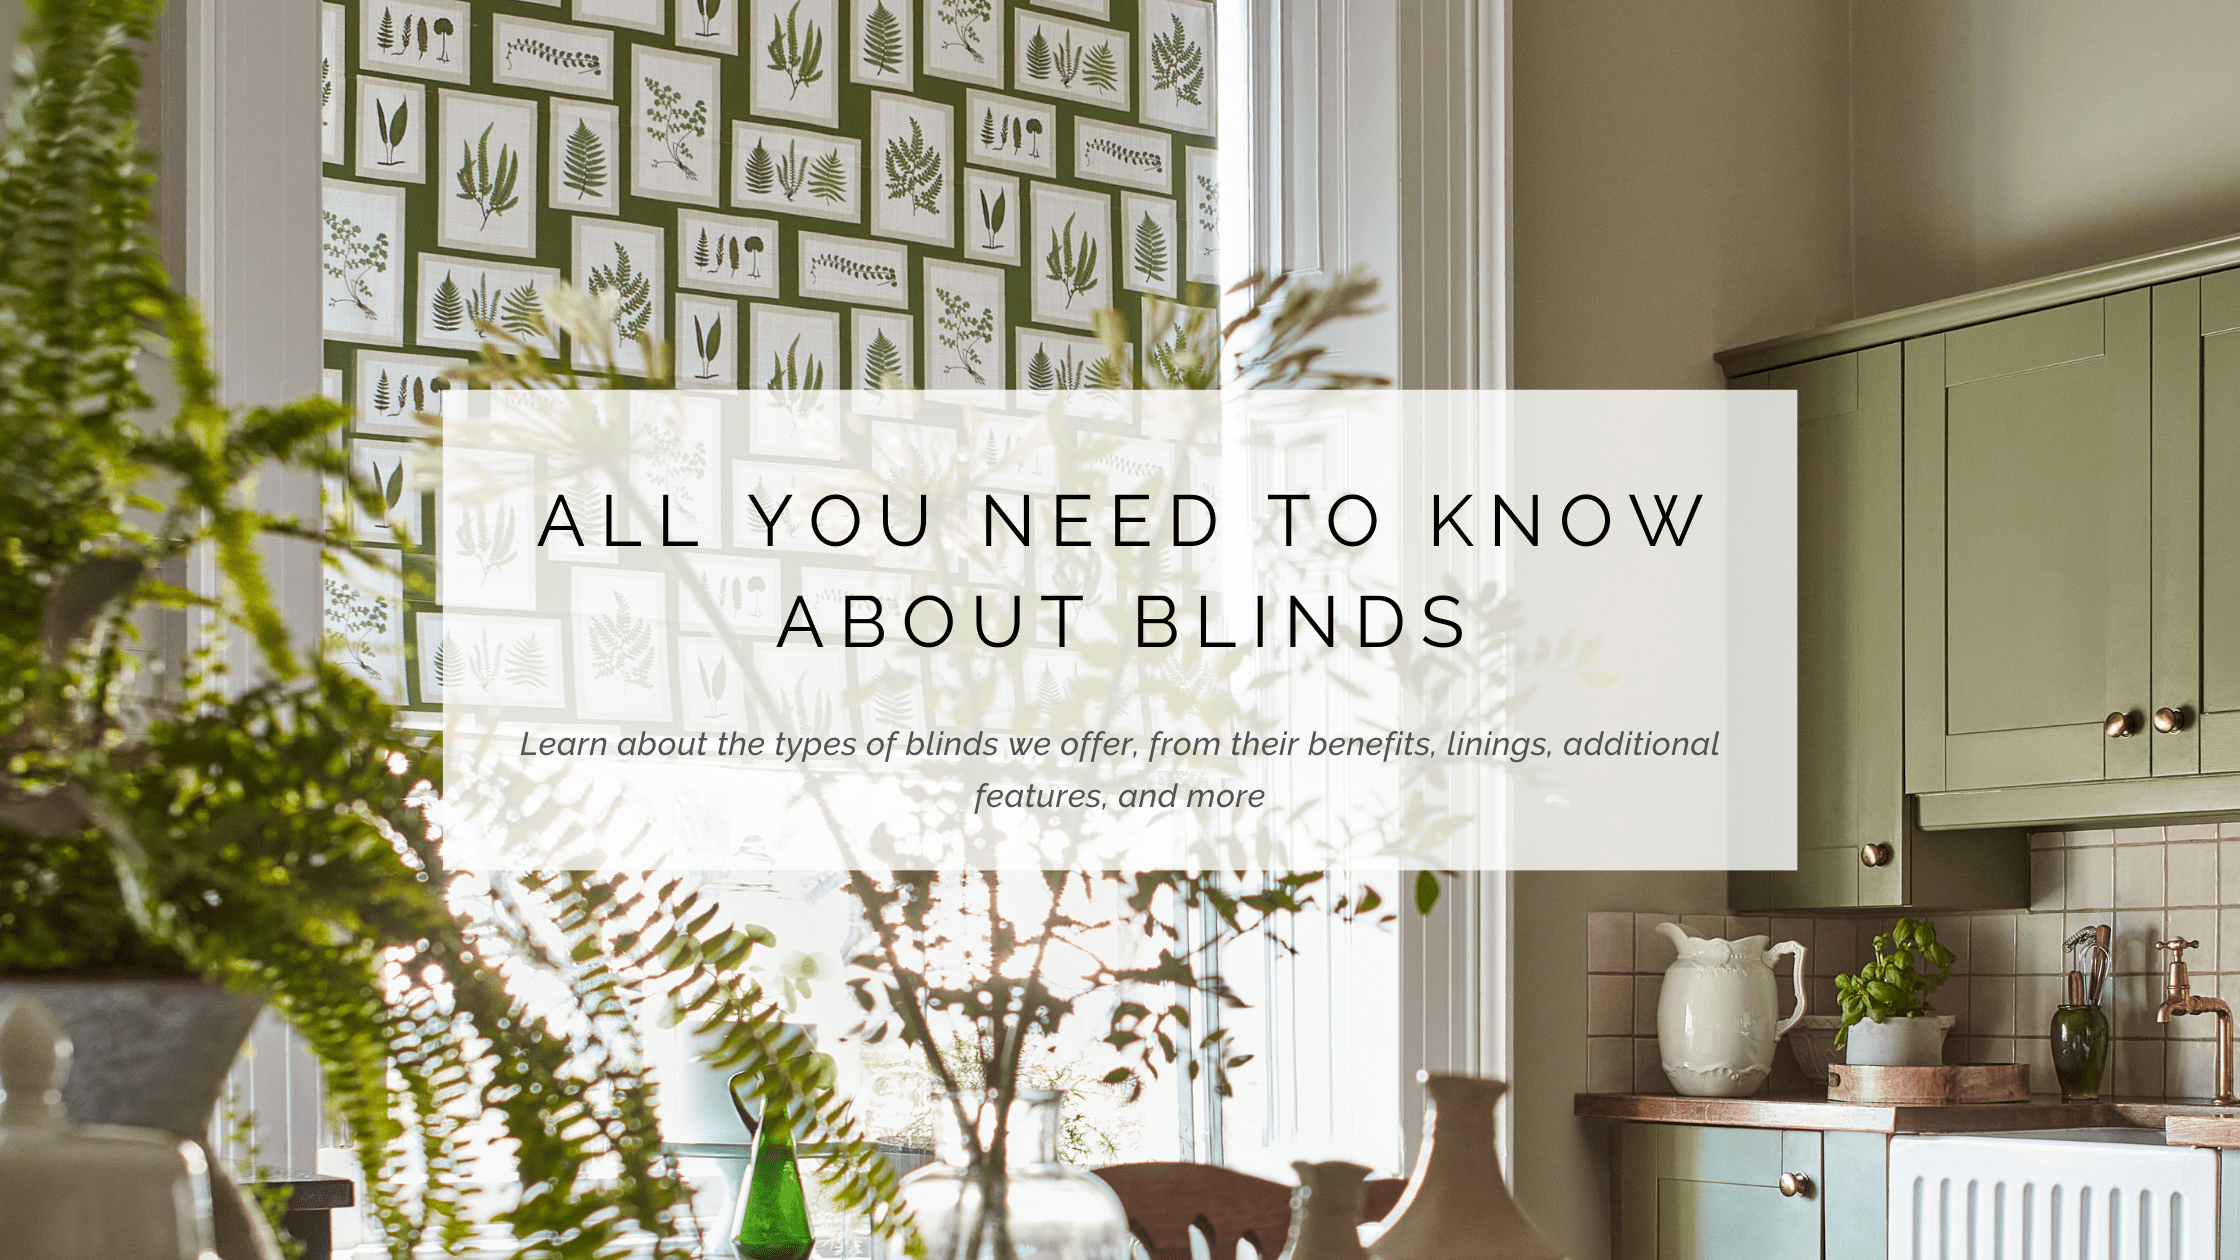 All you need to know about blinds